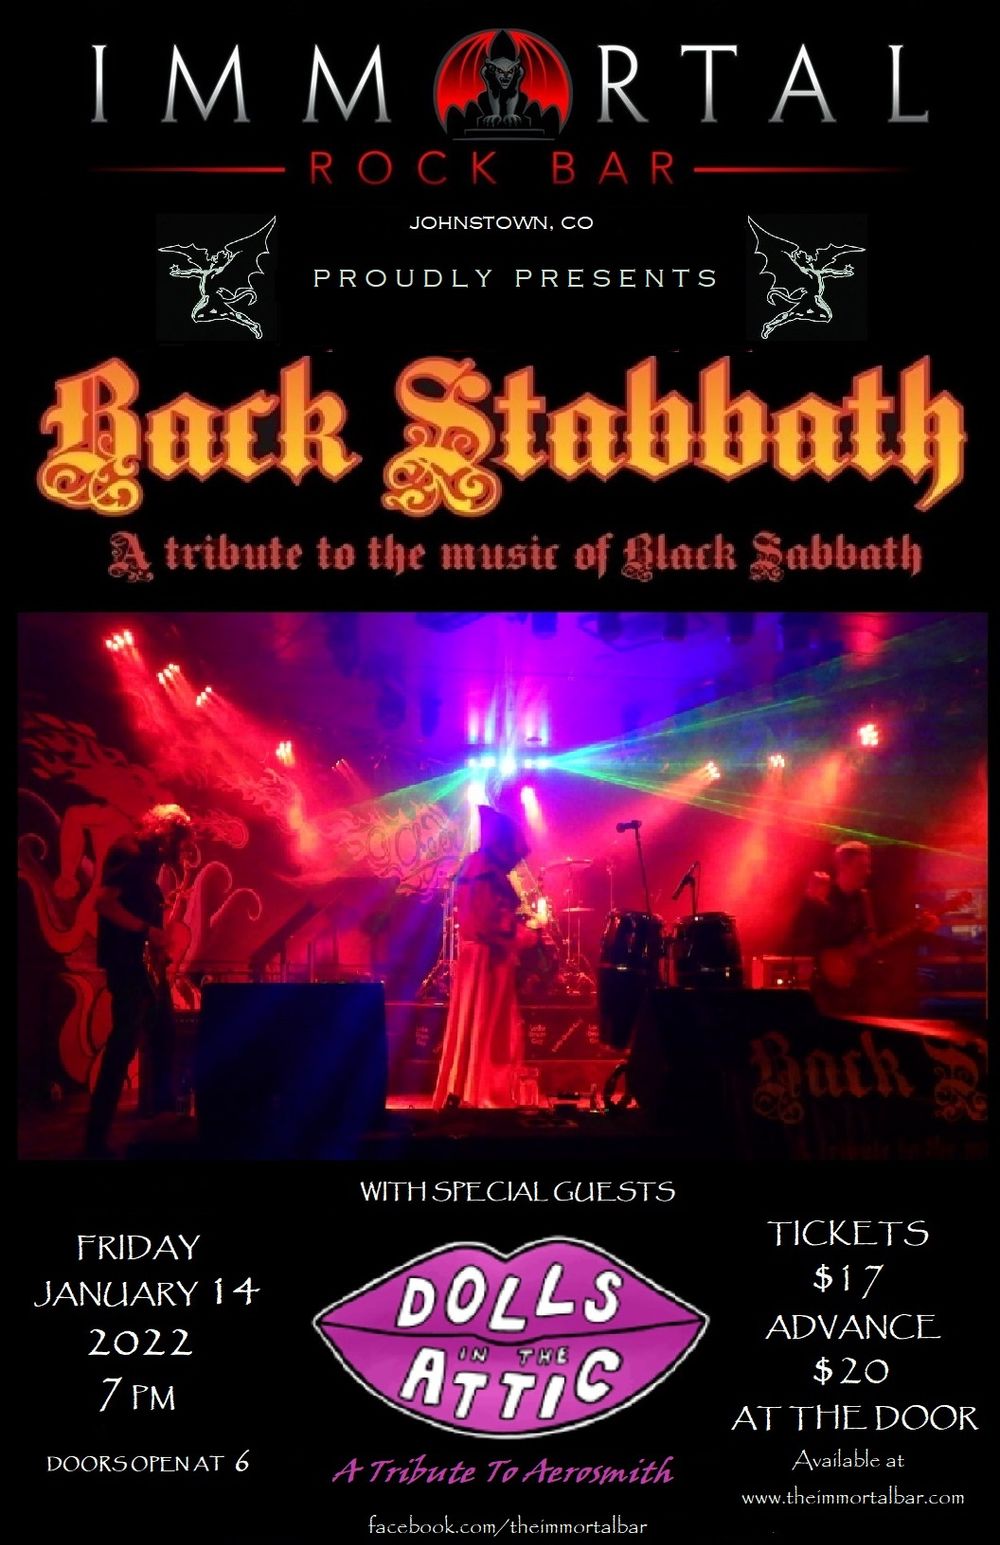 BACK STABBATH RETURNS TO THE IMMORTAL FOR A BIG NIGHT OF TRIBUTES !!